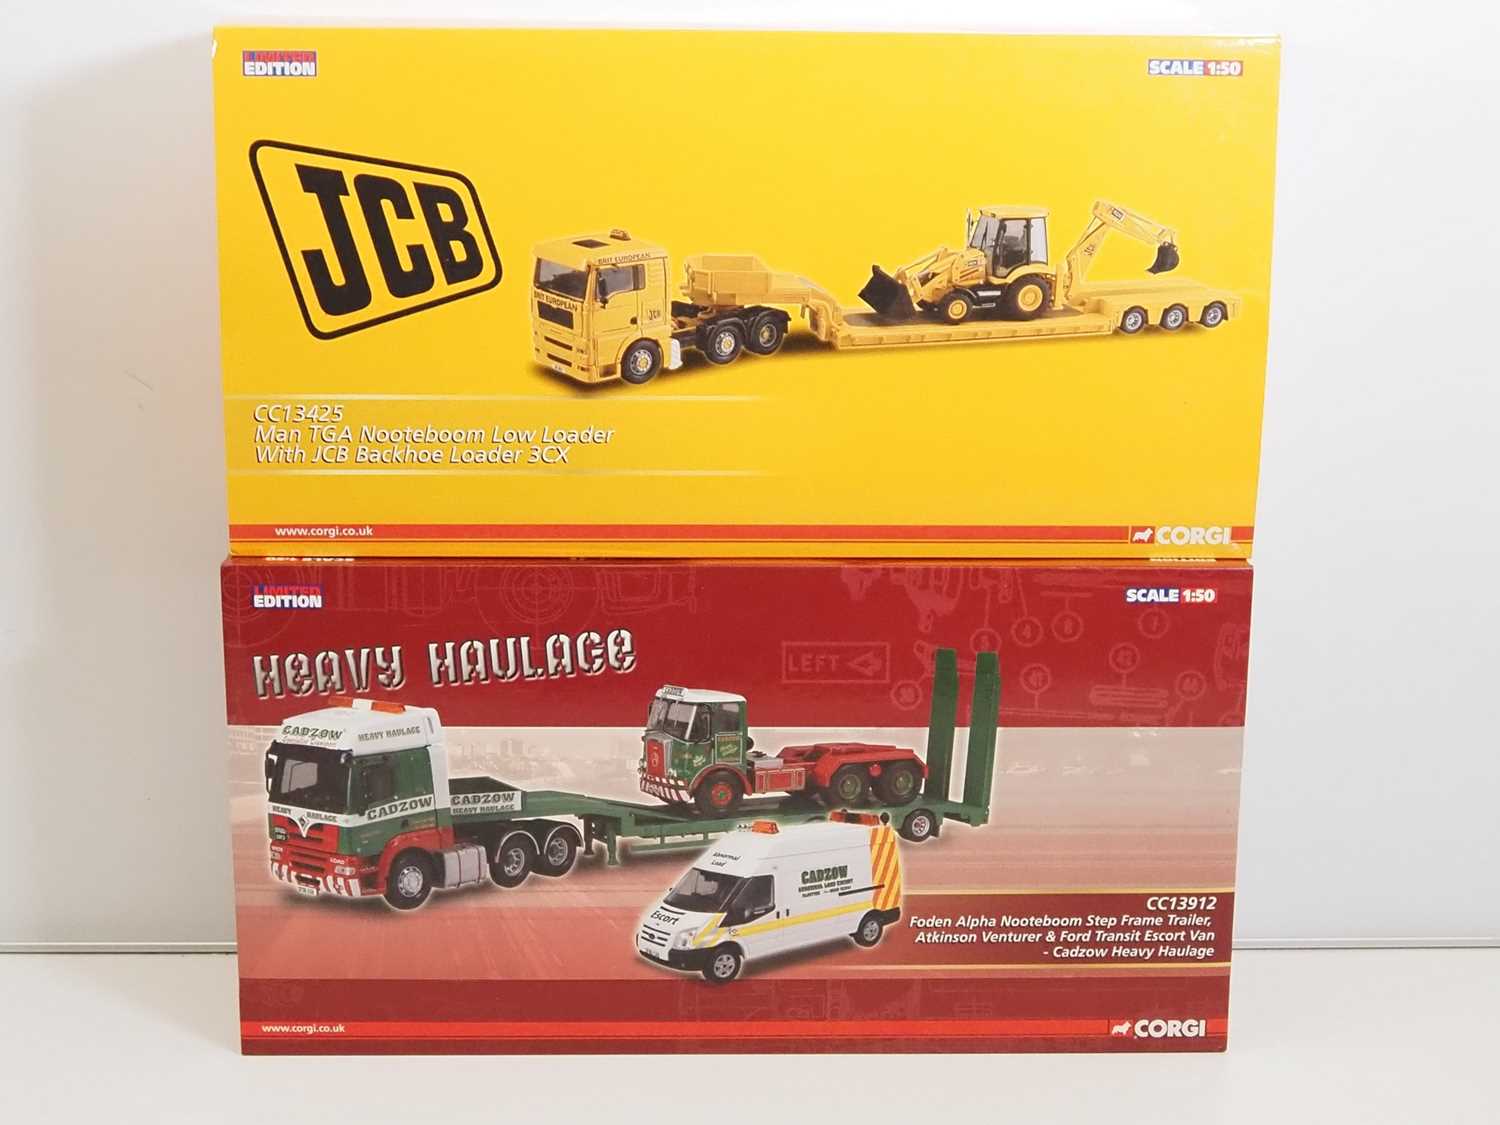 A pair of CORGI 1:50 scale diecast 'Heavy Haulage' articulated lorries comprising CC13425 and